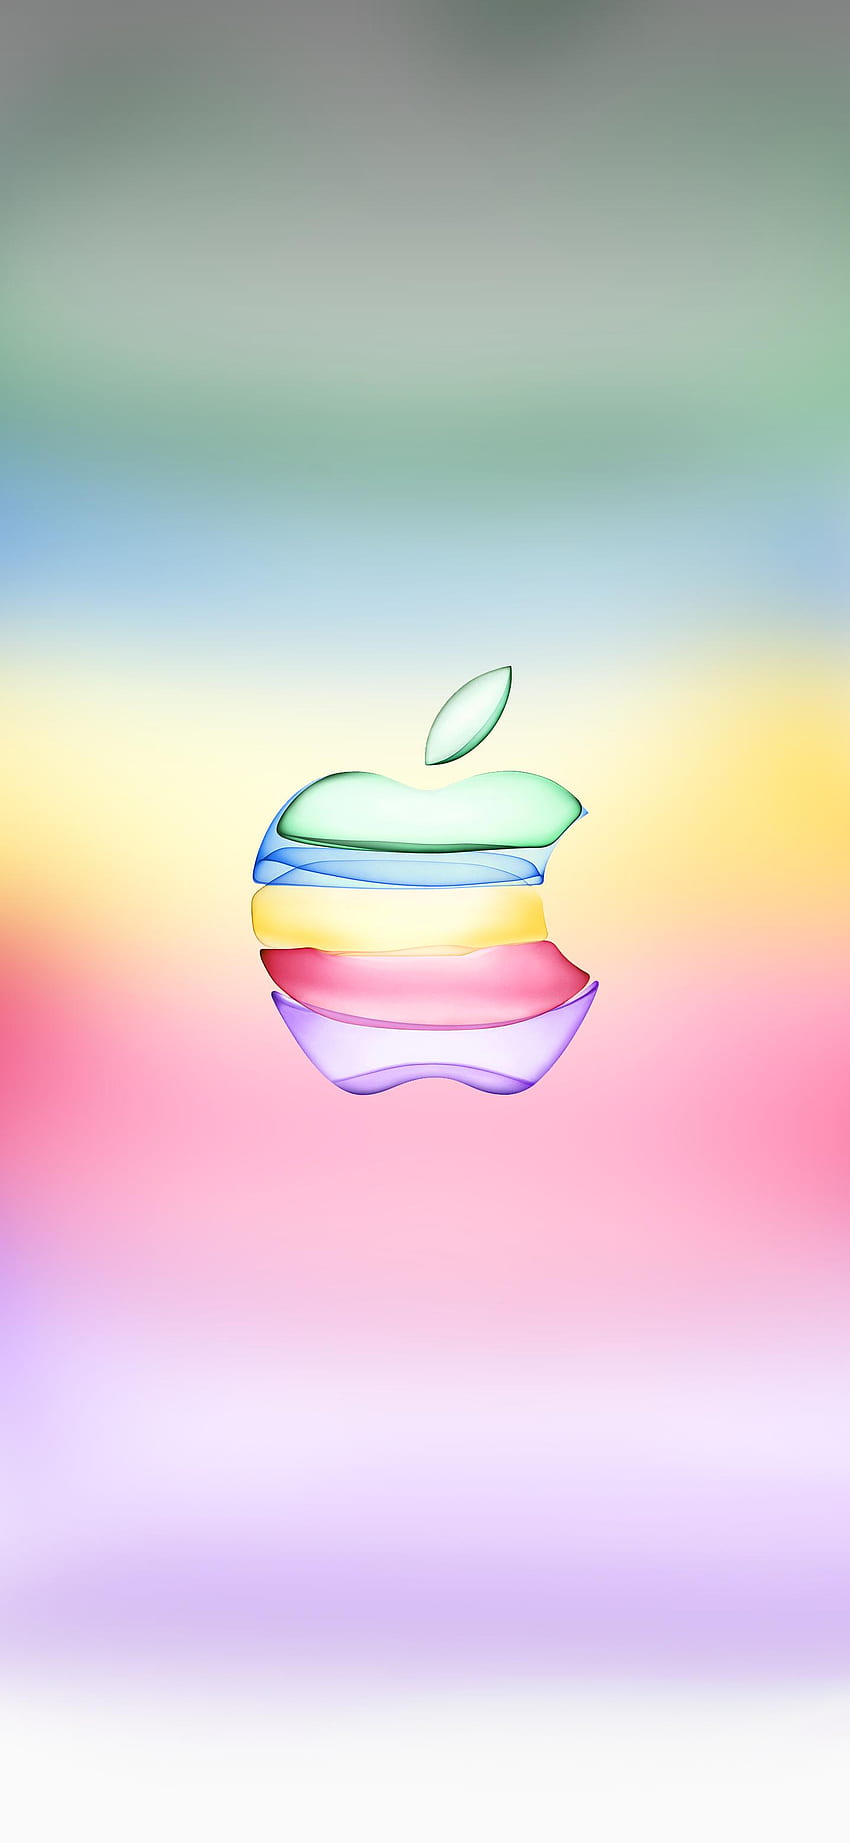 iPhone 11 and iPhone 11 Pro Wallpapers - iLikeWallpaper